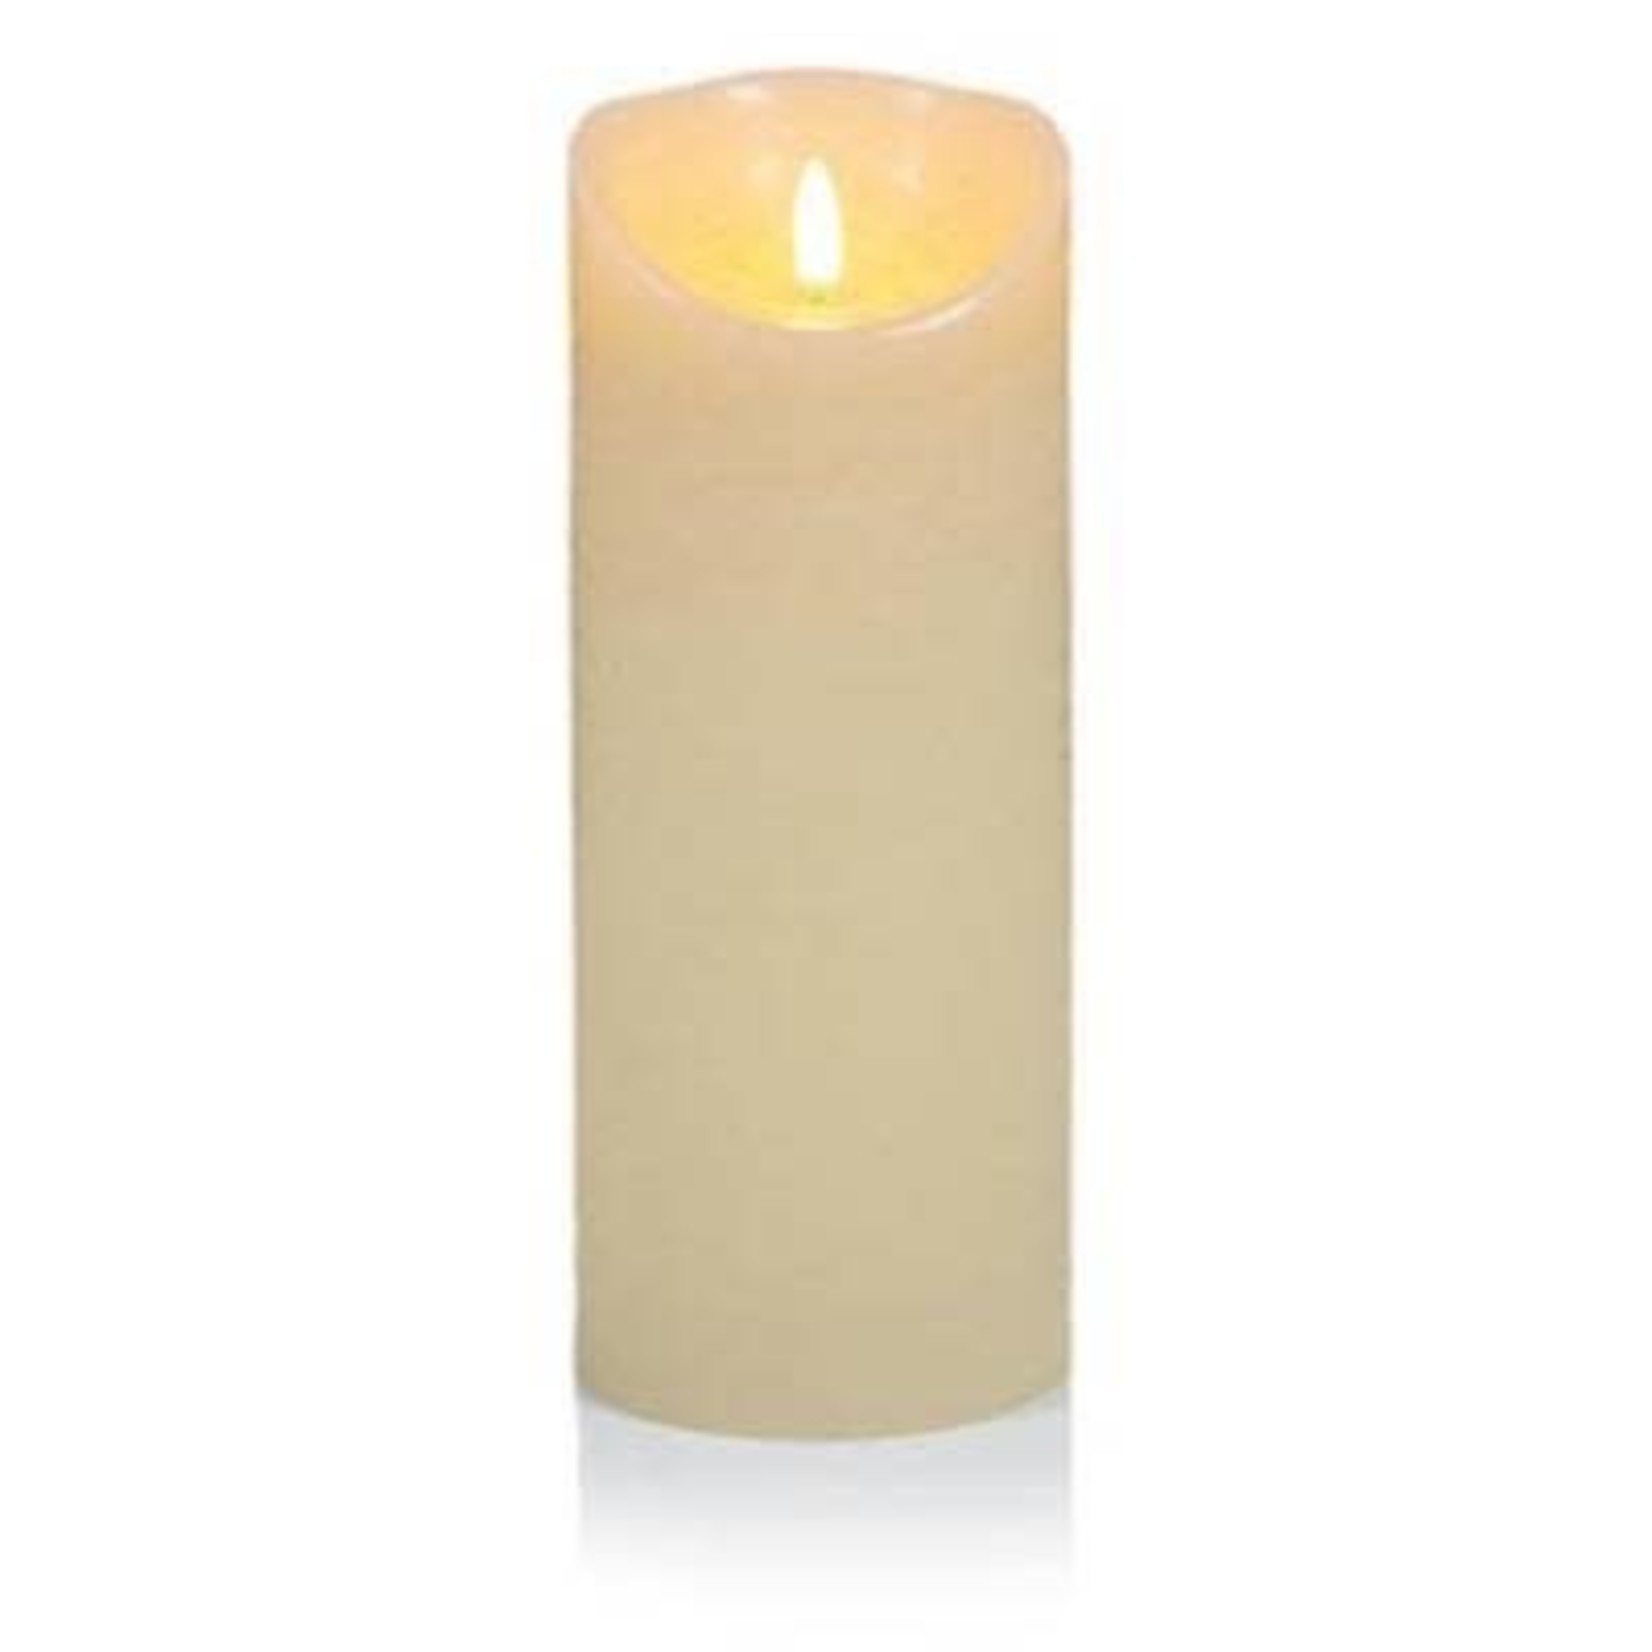 Premier Decorations Flickerbright Candle Large